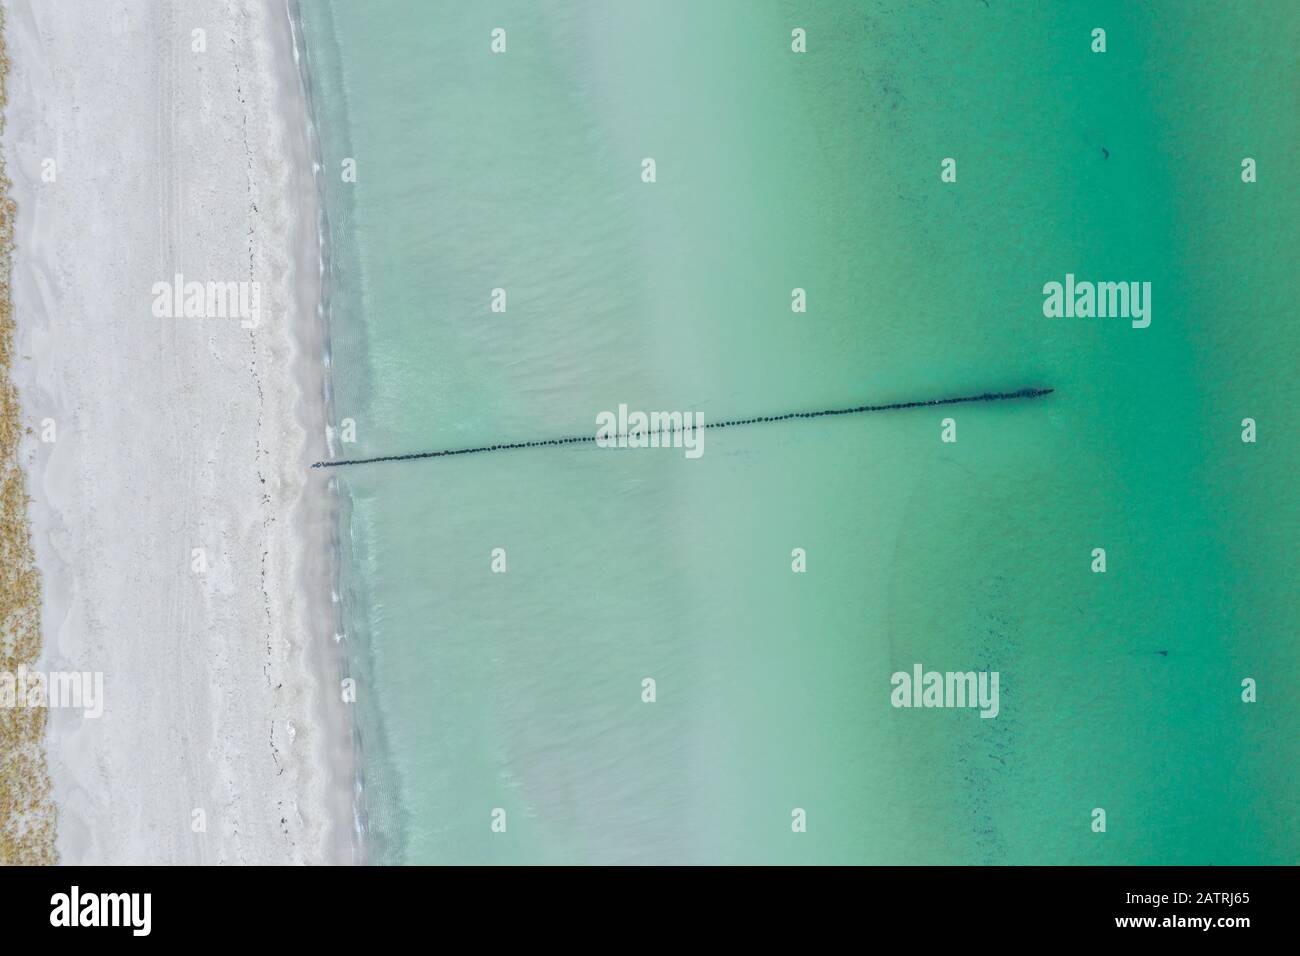 Beach between Prerow and Zingst, Baltic sea, drone shot, Mecklenburg-Western Pomerania, Germany Stock Photo